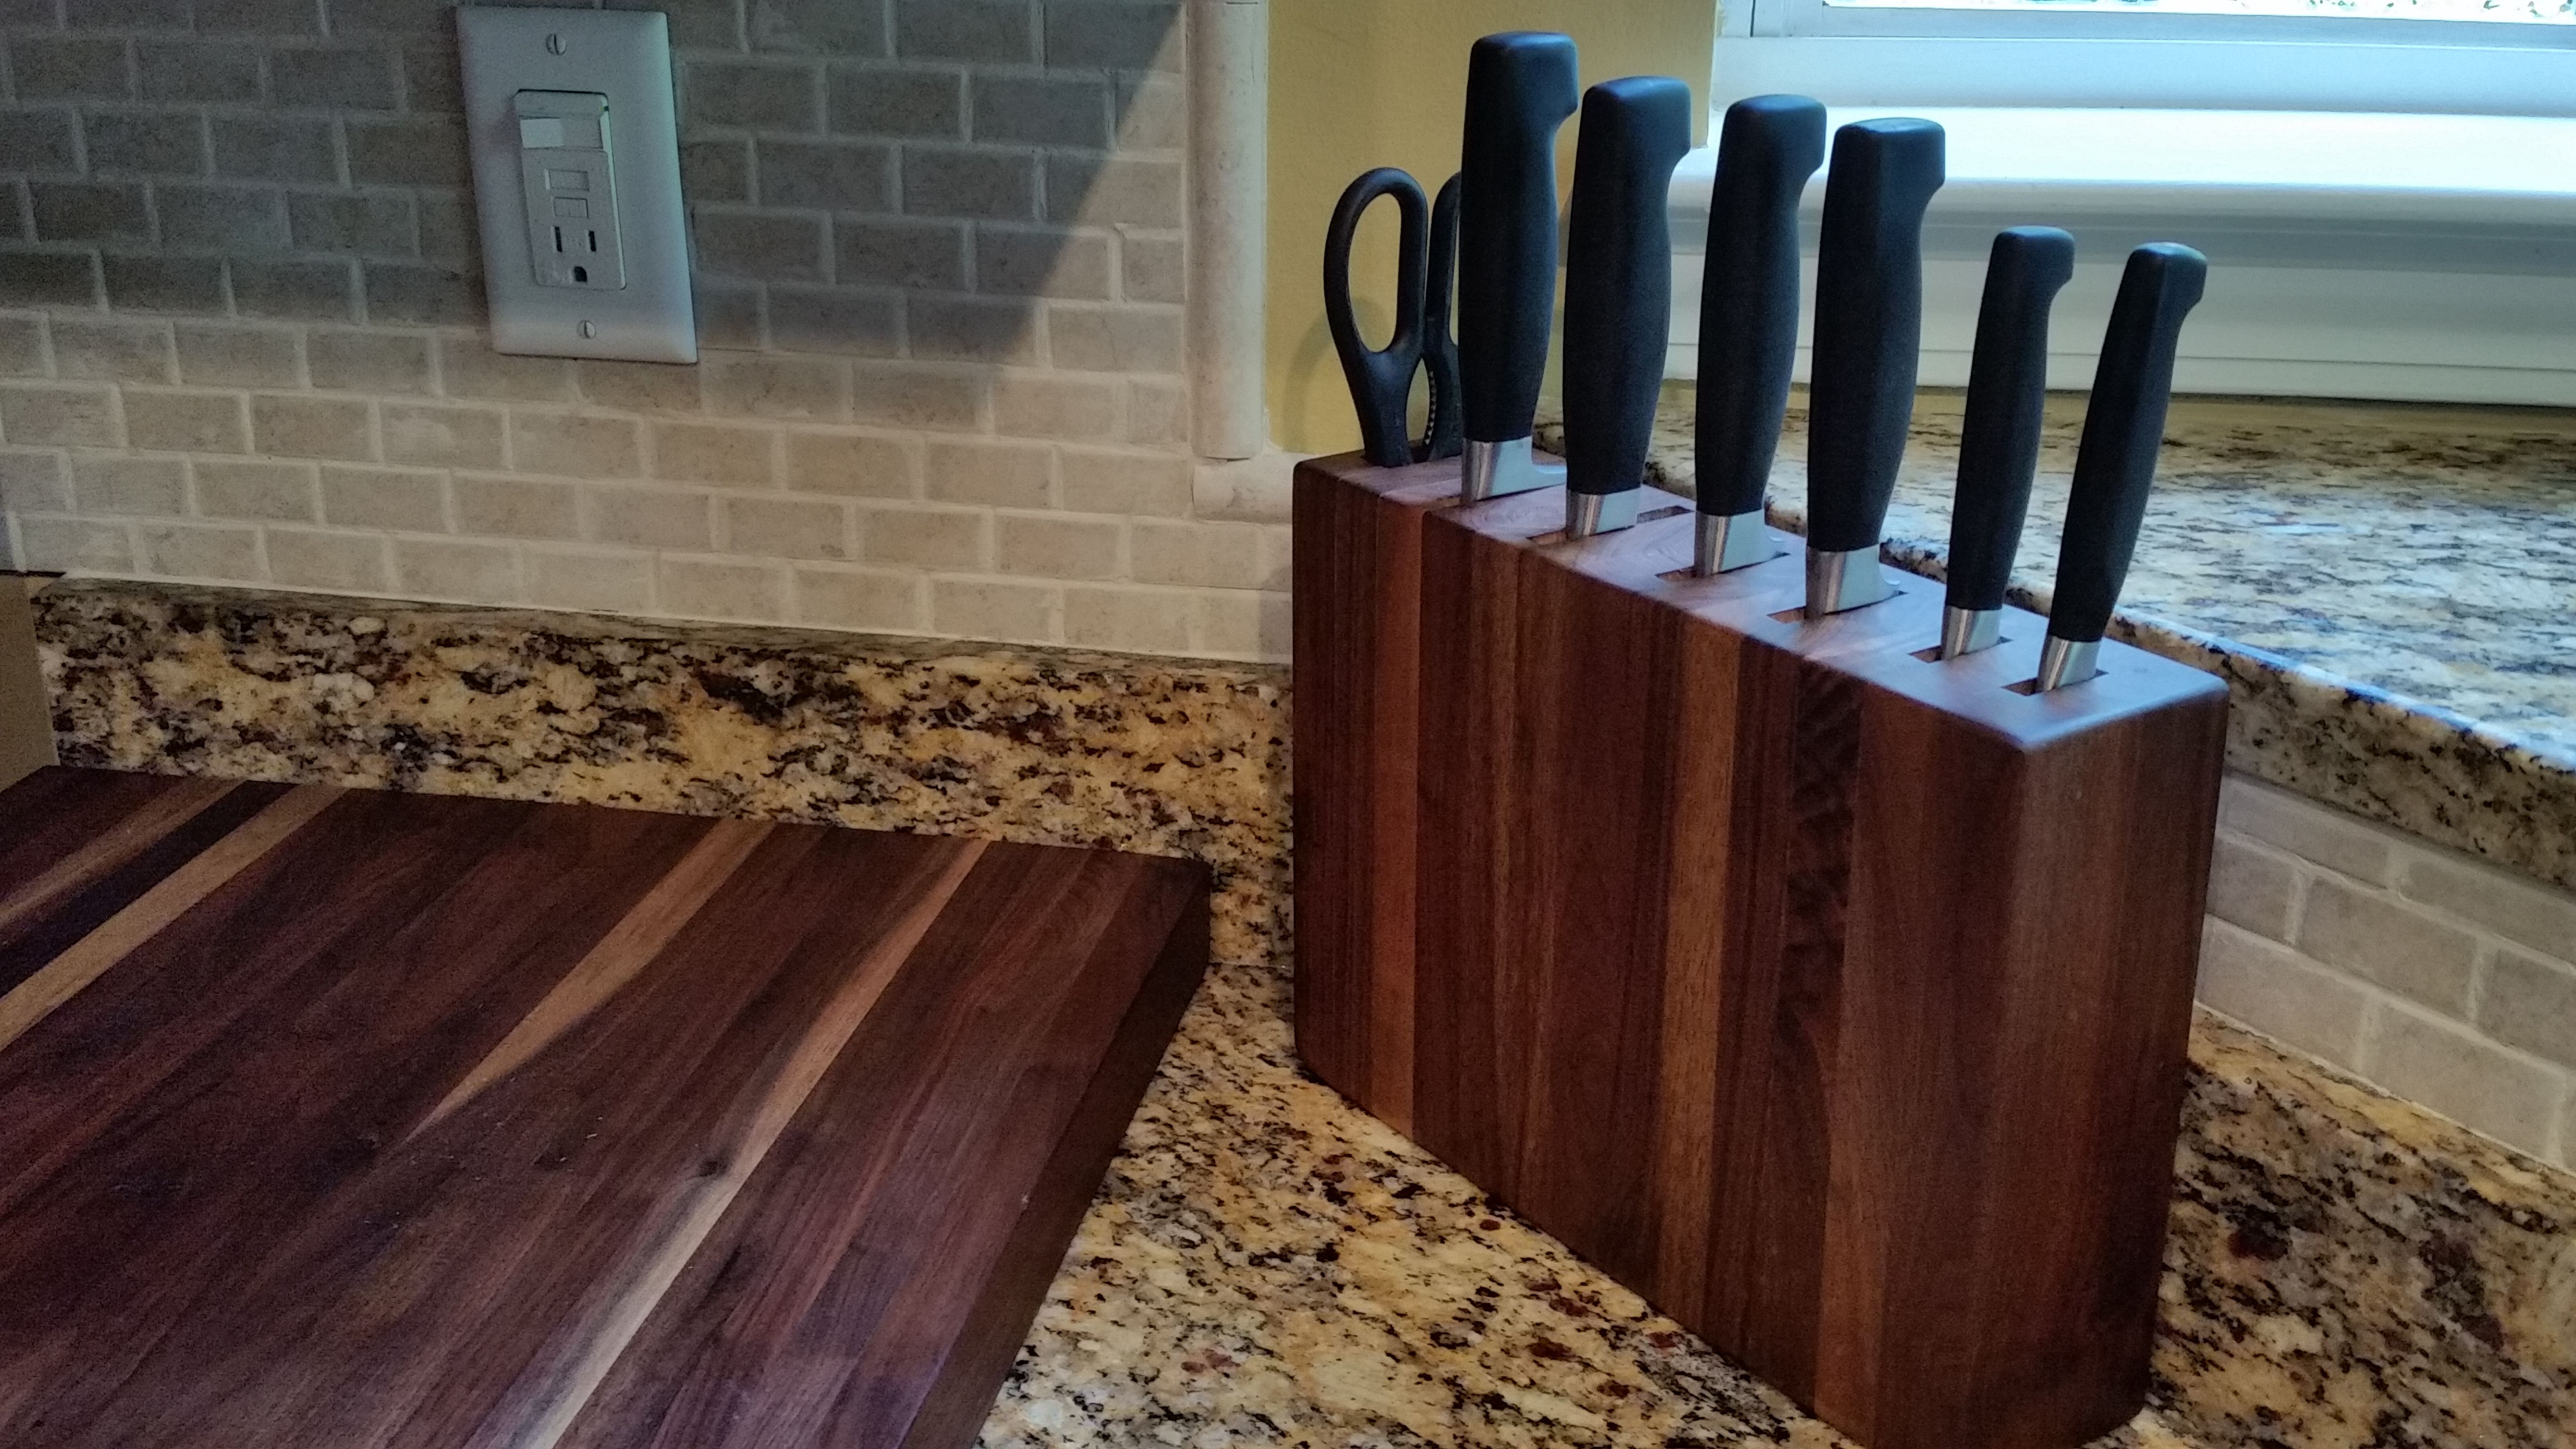 Hand Made Custom Knife Block-- by Woodworking Plus